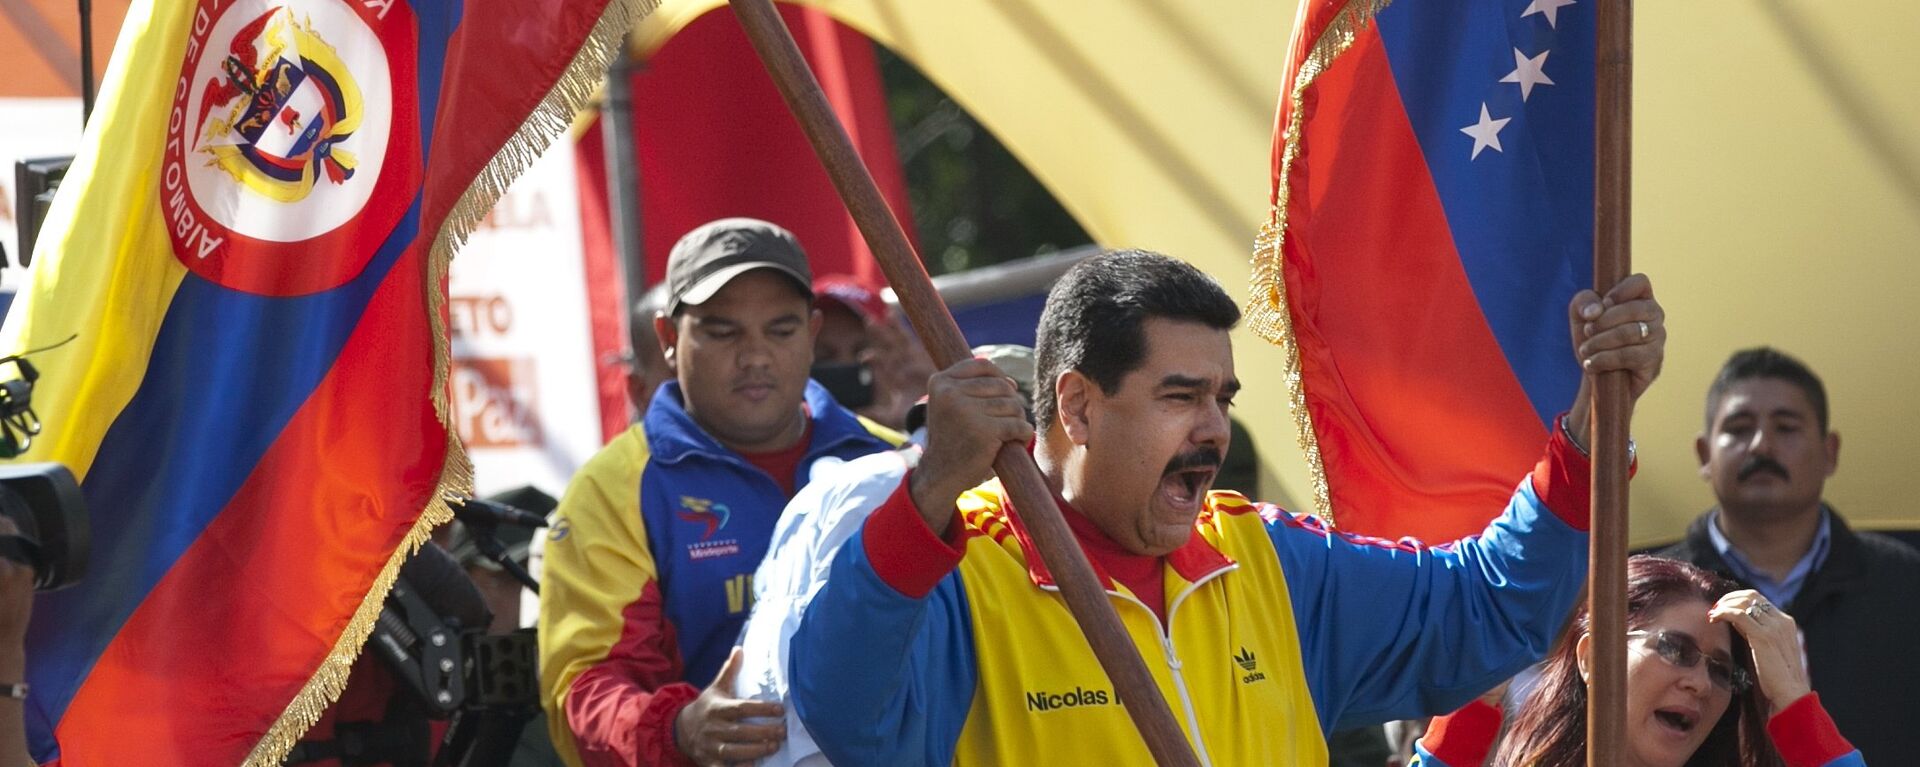 Venezuela's President Nicolas Maduro holds up a Colombian national flag, left, alongside his country's national flag, during a rally in support of closing the Colombian border, in Caracas, Venezuela, Friday, Aug. 28, 2015. - Sputnik Mundo, 1920, 02.06.2022